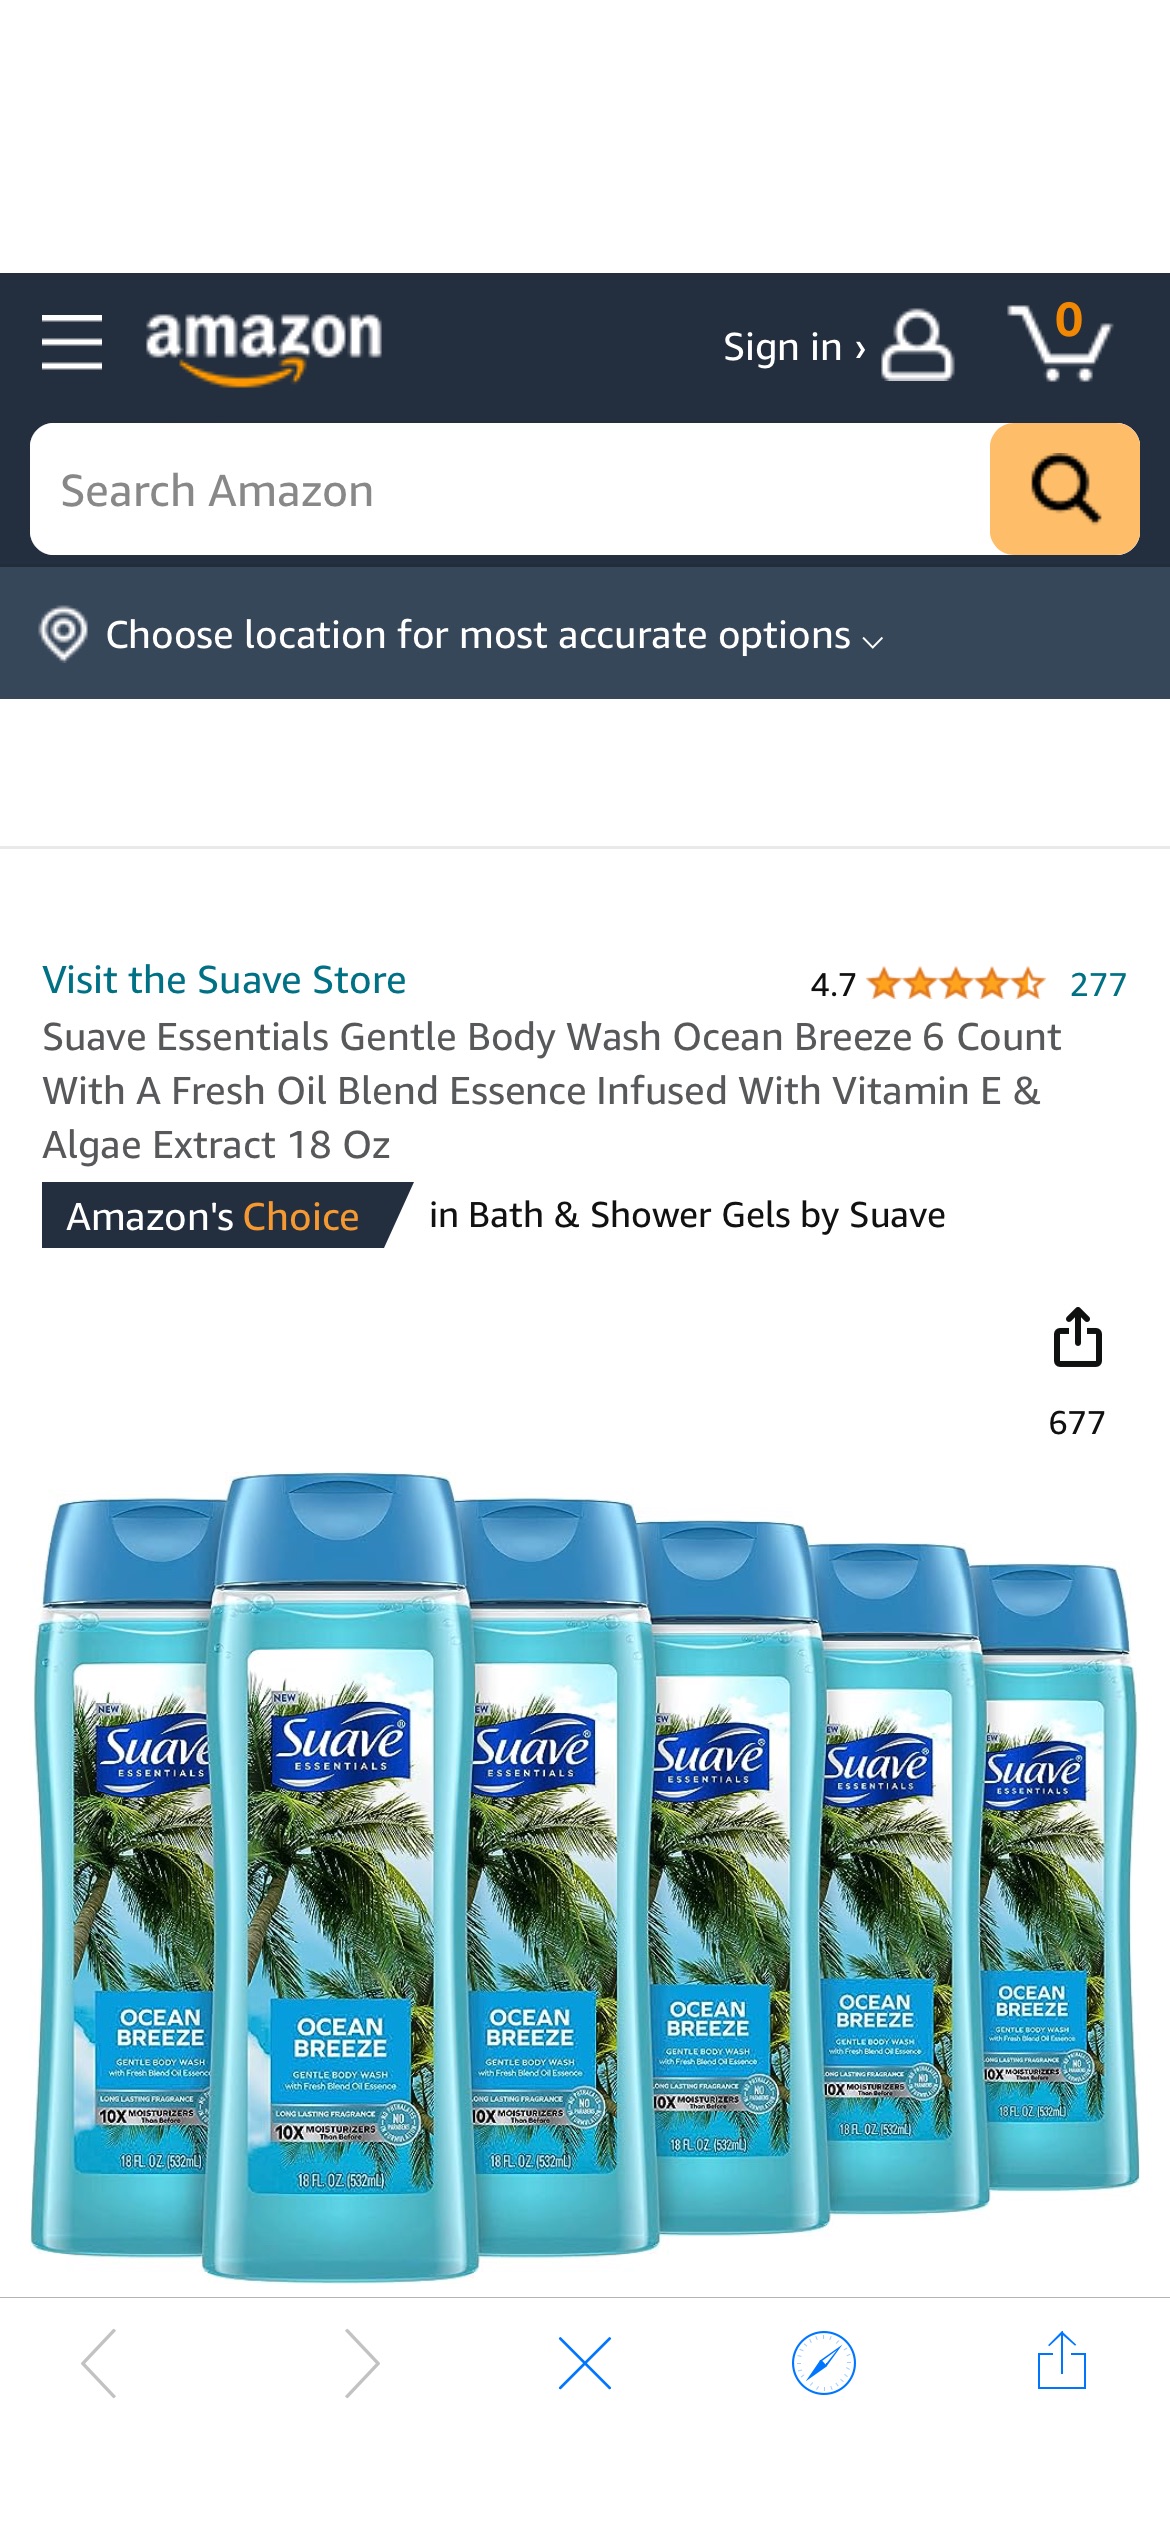 Amazon.com : Suave Essentials Gentle Body Wash Ocean Breeze 6 Count With A Fresh Oil Blend Essence Infused With Vitamin E & Algae Extract 18 Oz : Beauty & Personal Care